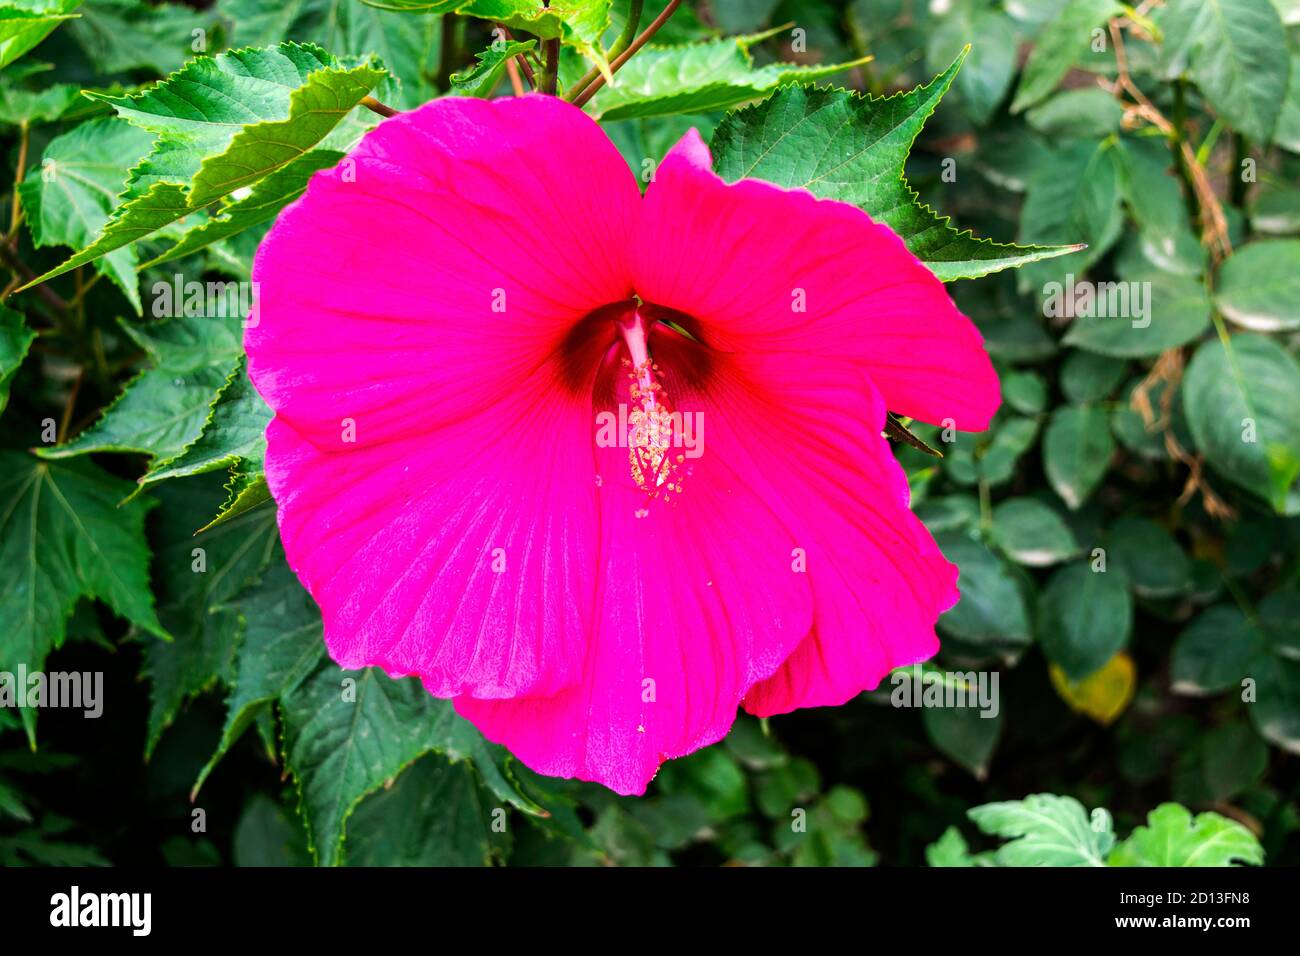 a pink hibiscus flower blooming against green foliage Stock Photo